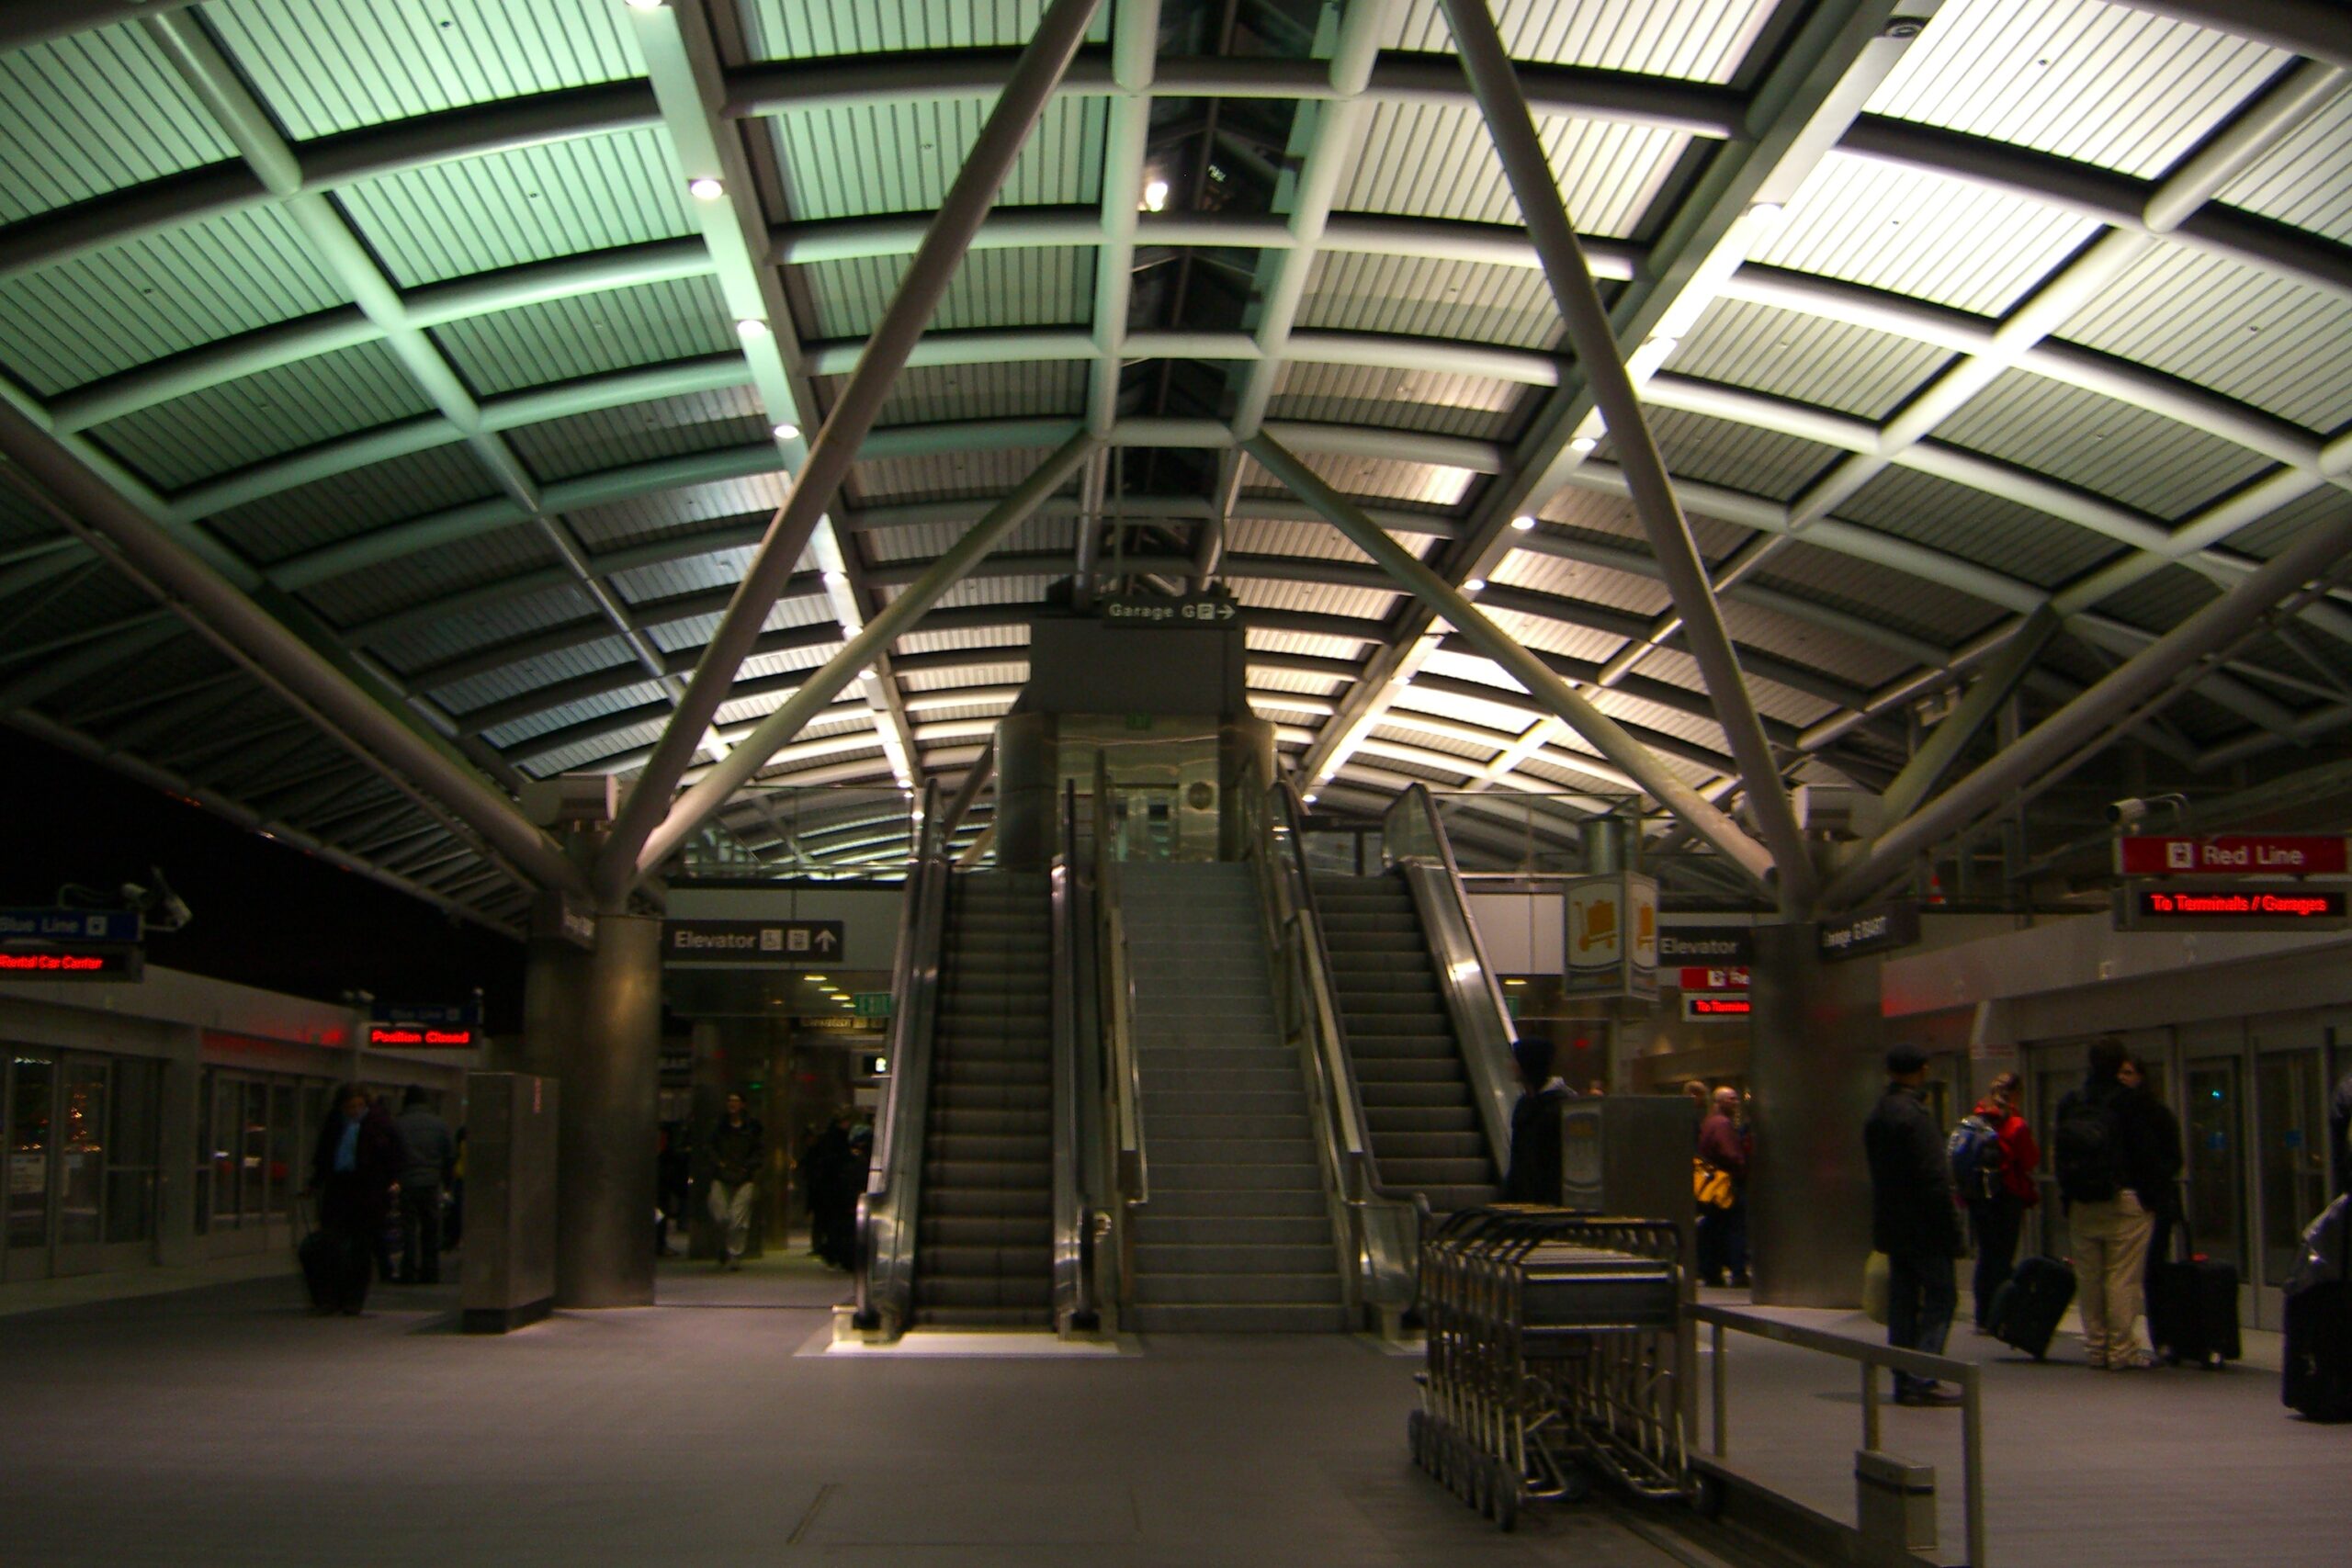 Signs for the Blue Line (left) and Red Line (right) in an AirTrain terminal at the San Francisco International Airport.